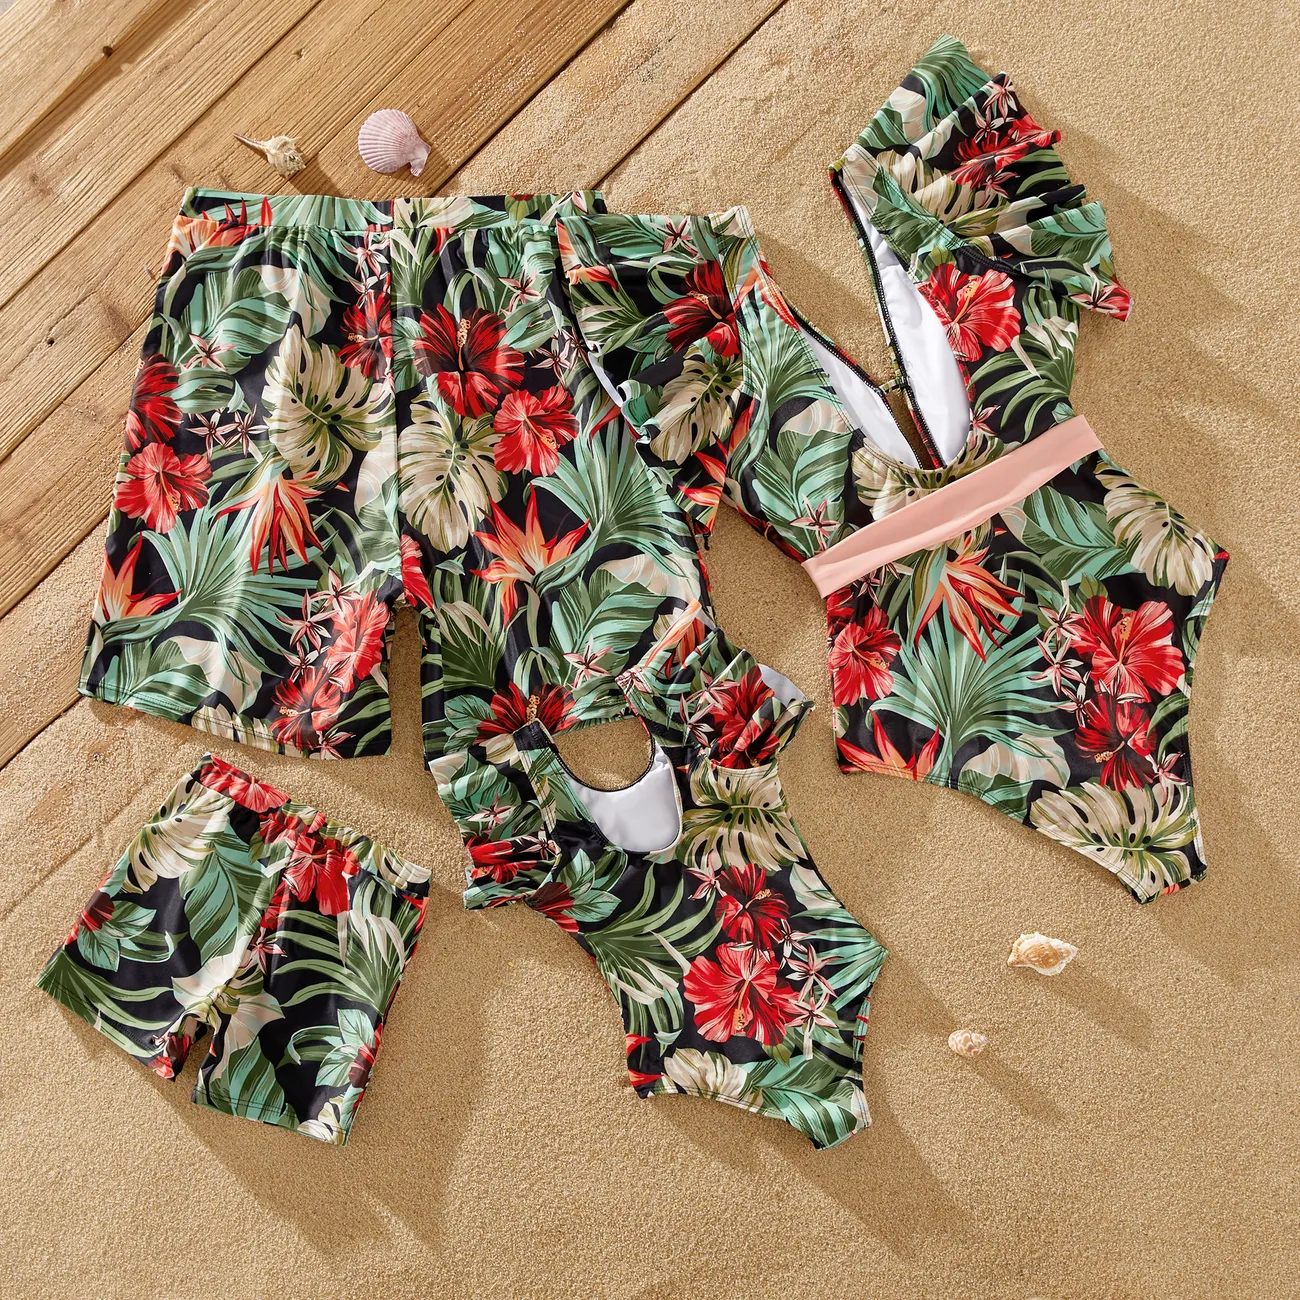 Family Matching Allover Floral Print Swim Trunks Shorts and Ruffle Belted One-Piece Swimsuit Pink big image 1